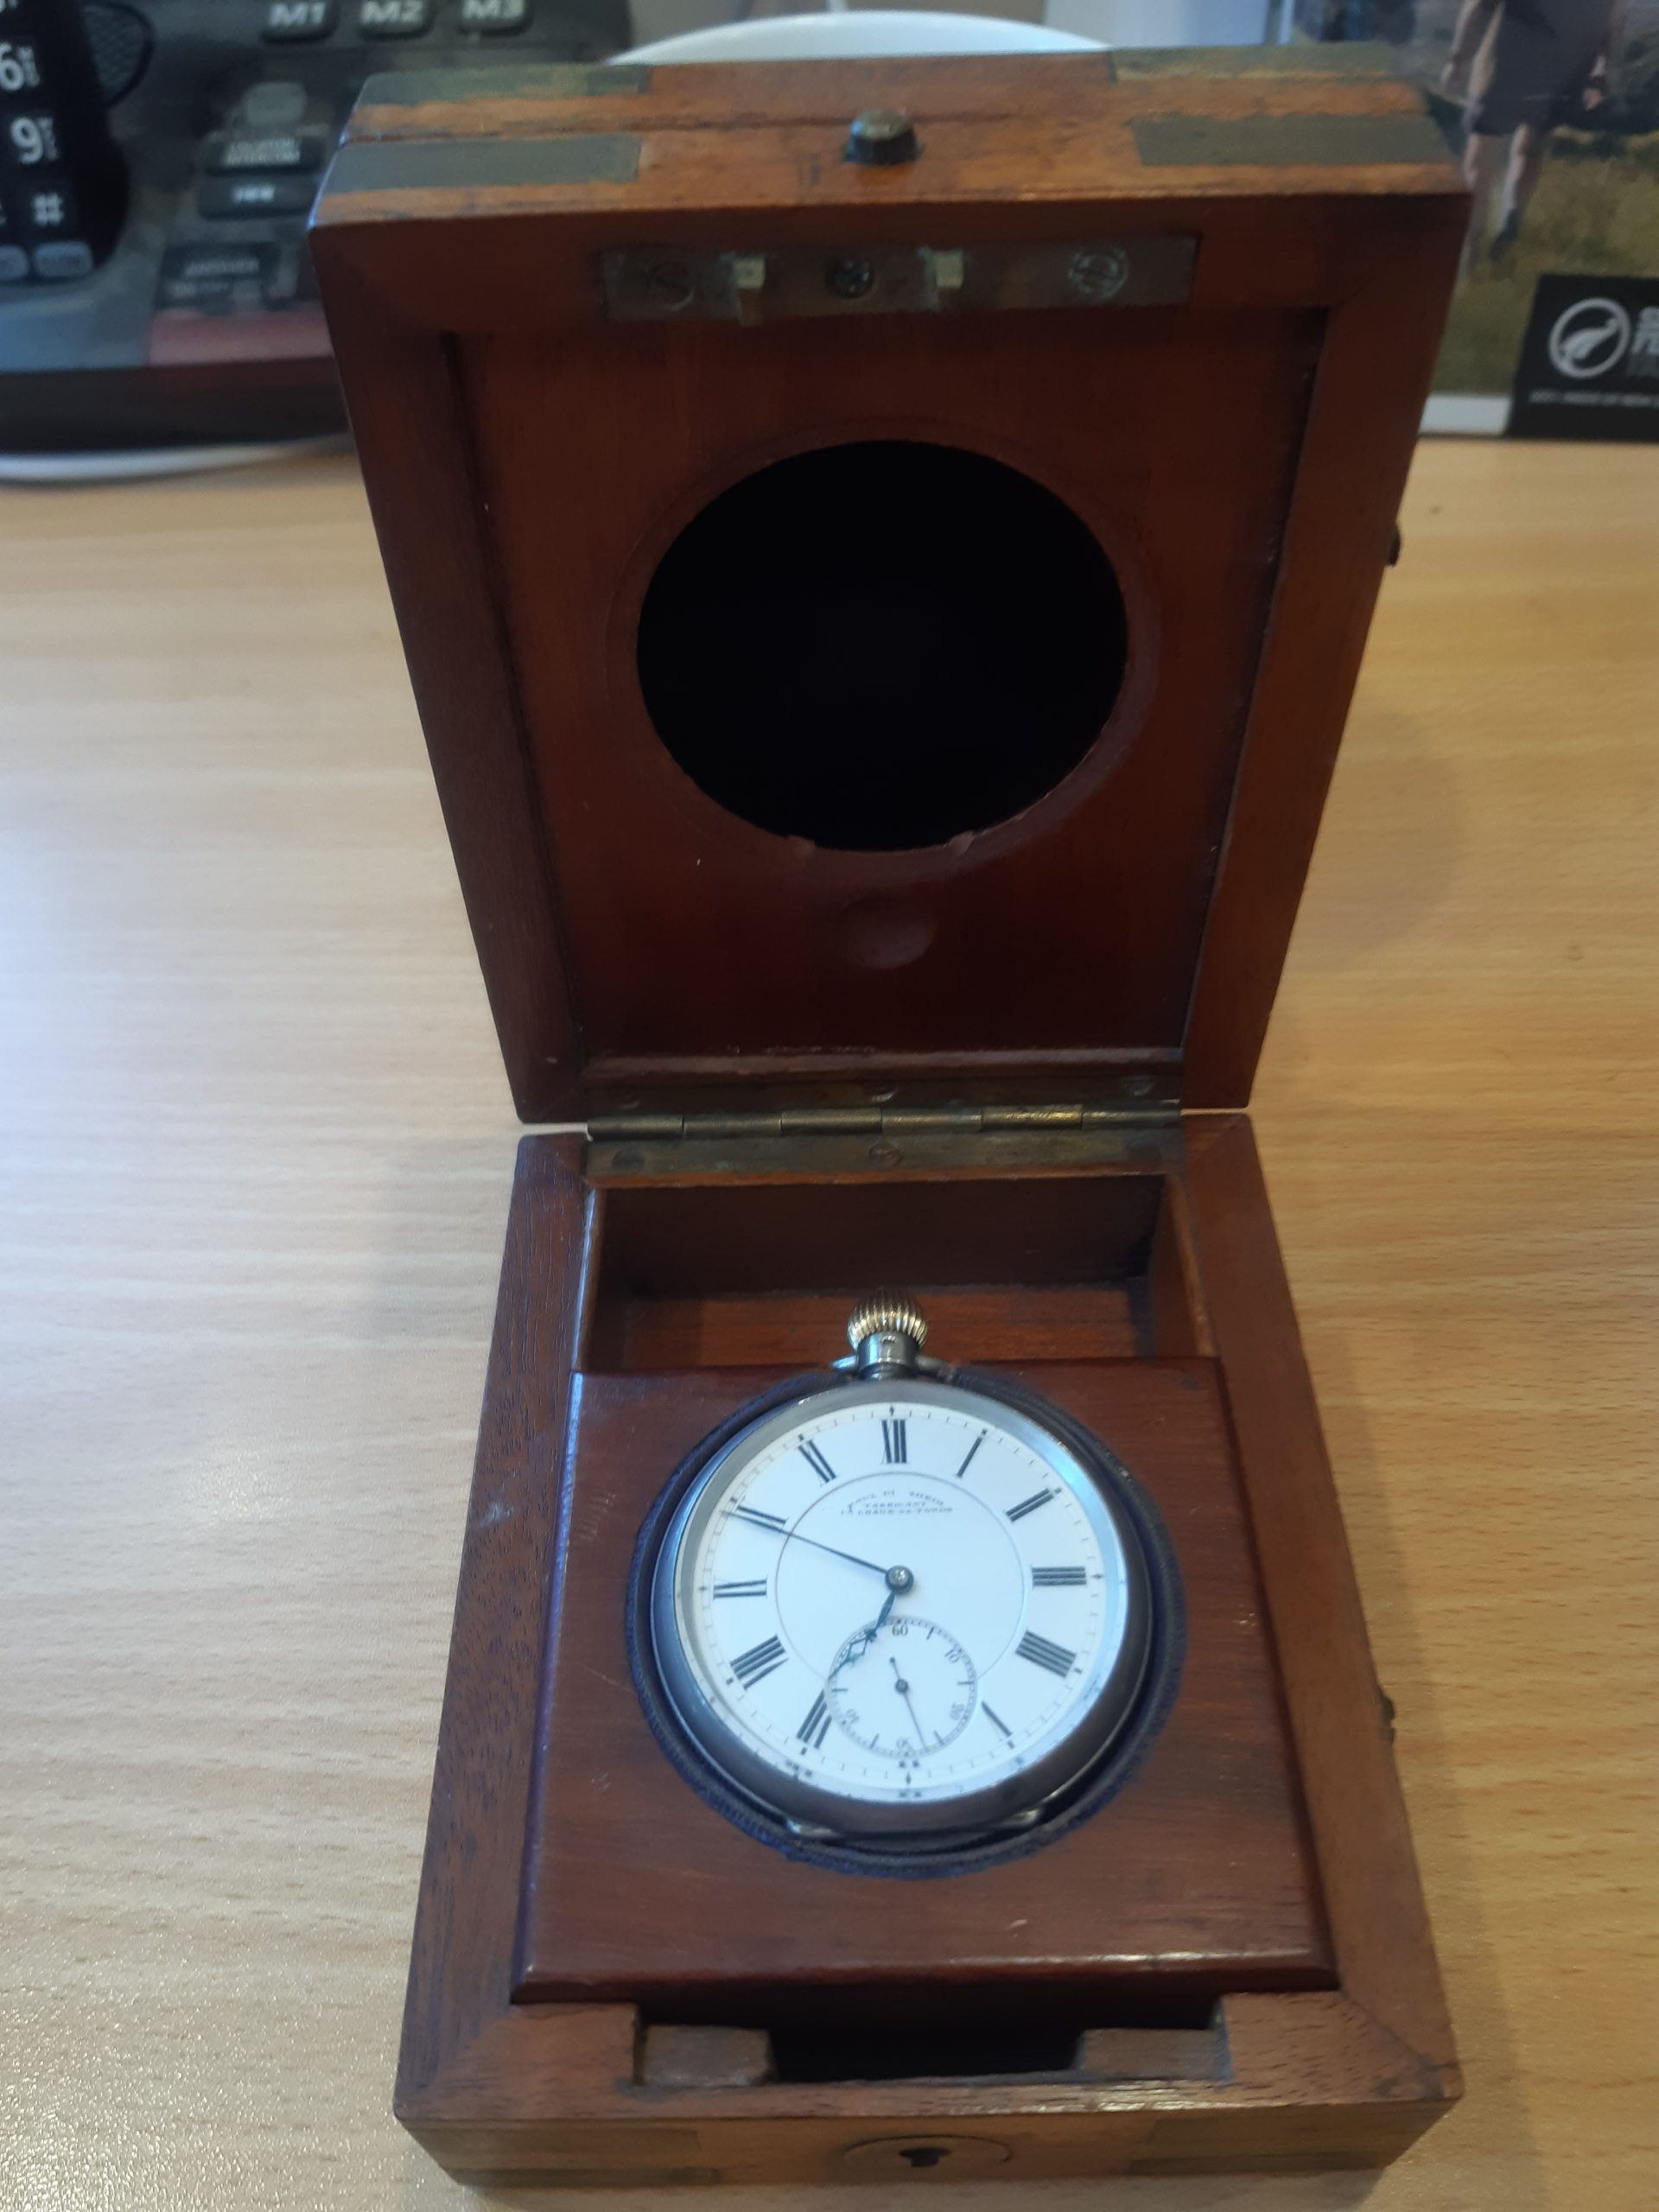 The watch, face-up, in a hinged wooden box